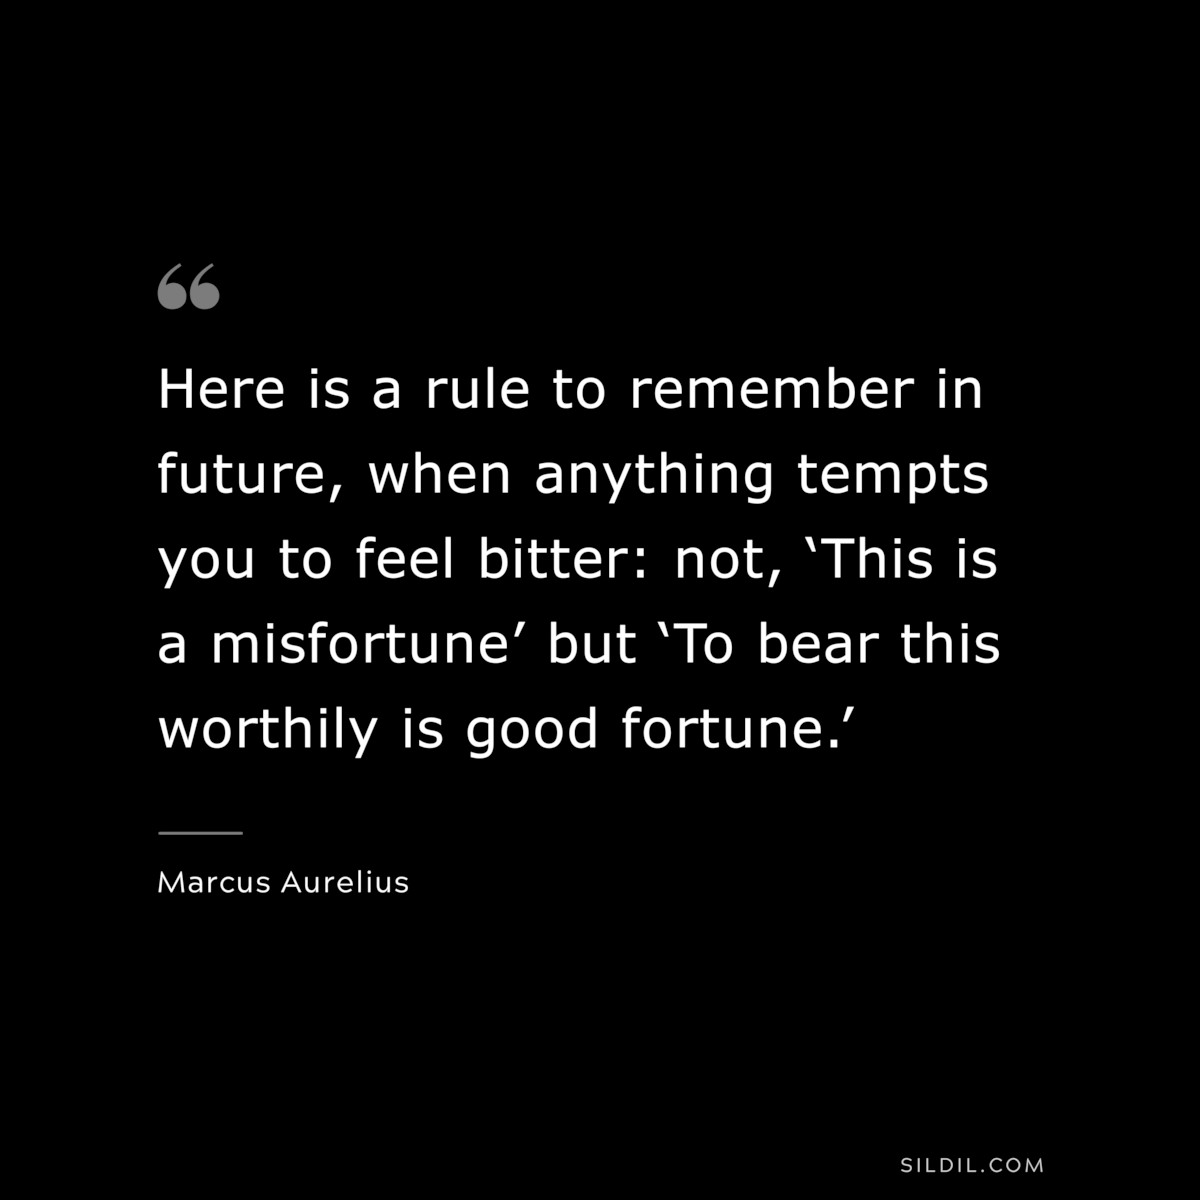 Here is a rule to remember in future, when anything tempts you to feel bitter: not, ‘This is a misfortune’ but ‘To bear this worthily is good fortune.’ ― Marcus Aurelius